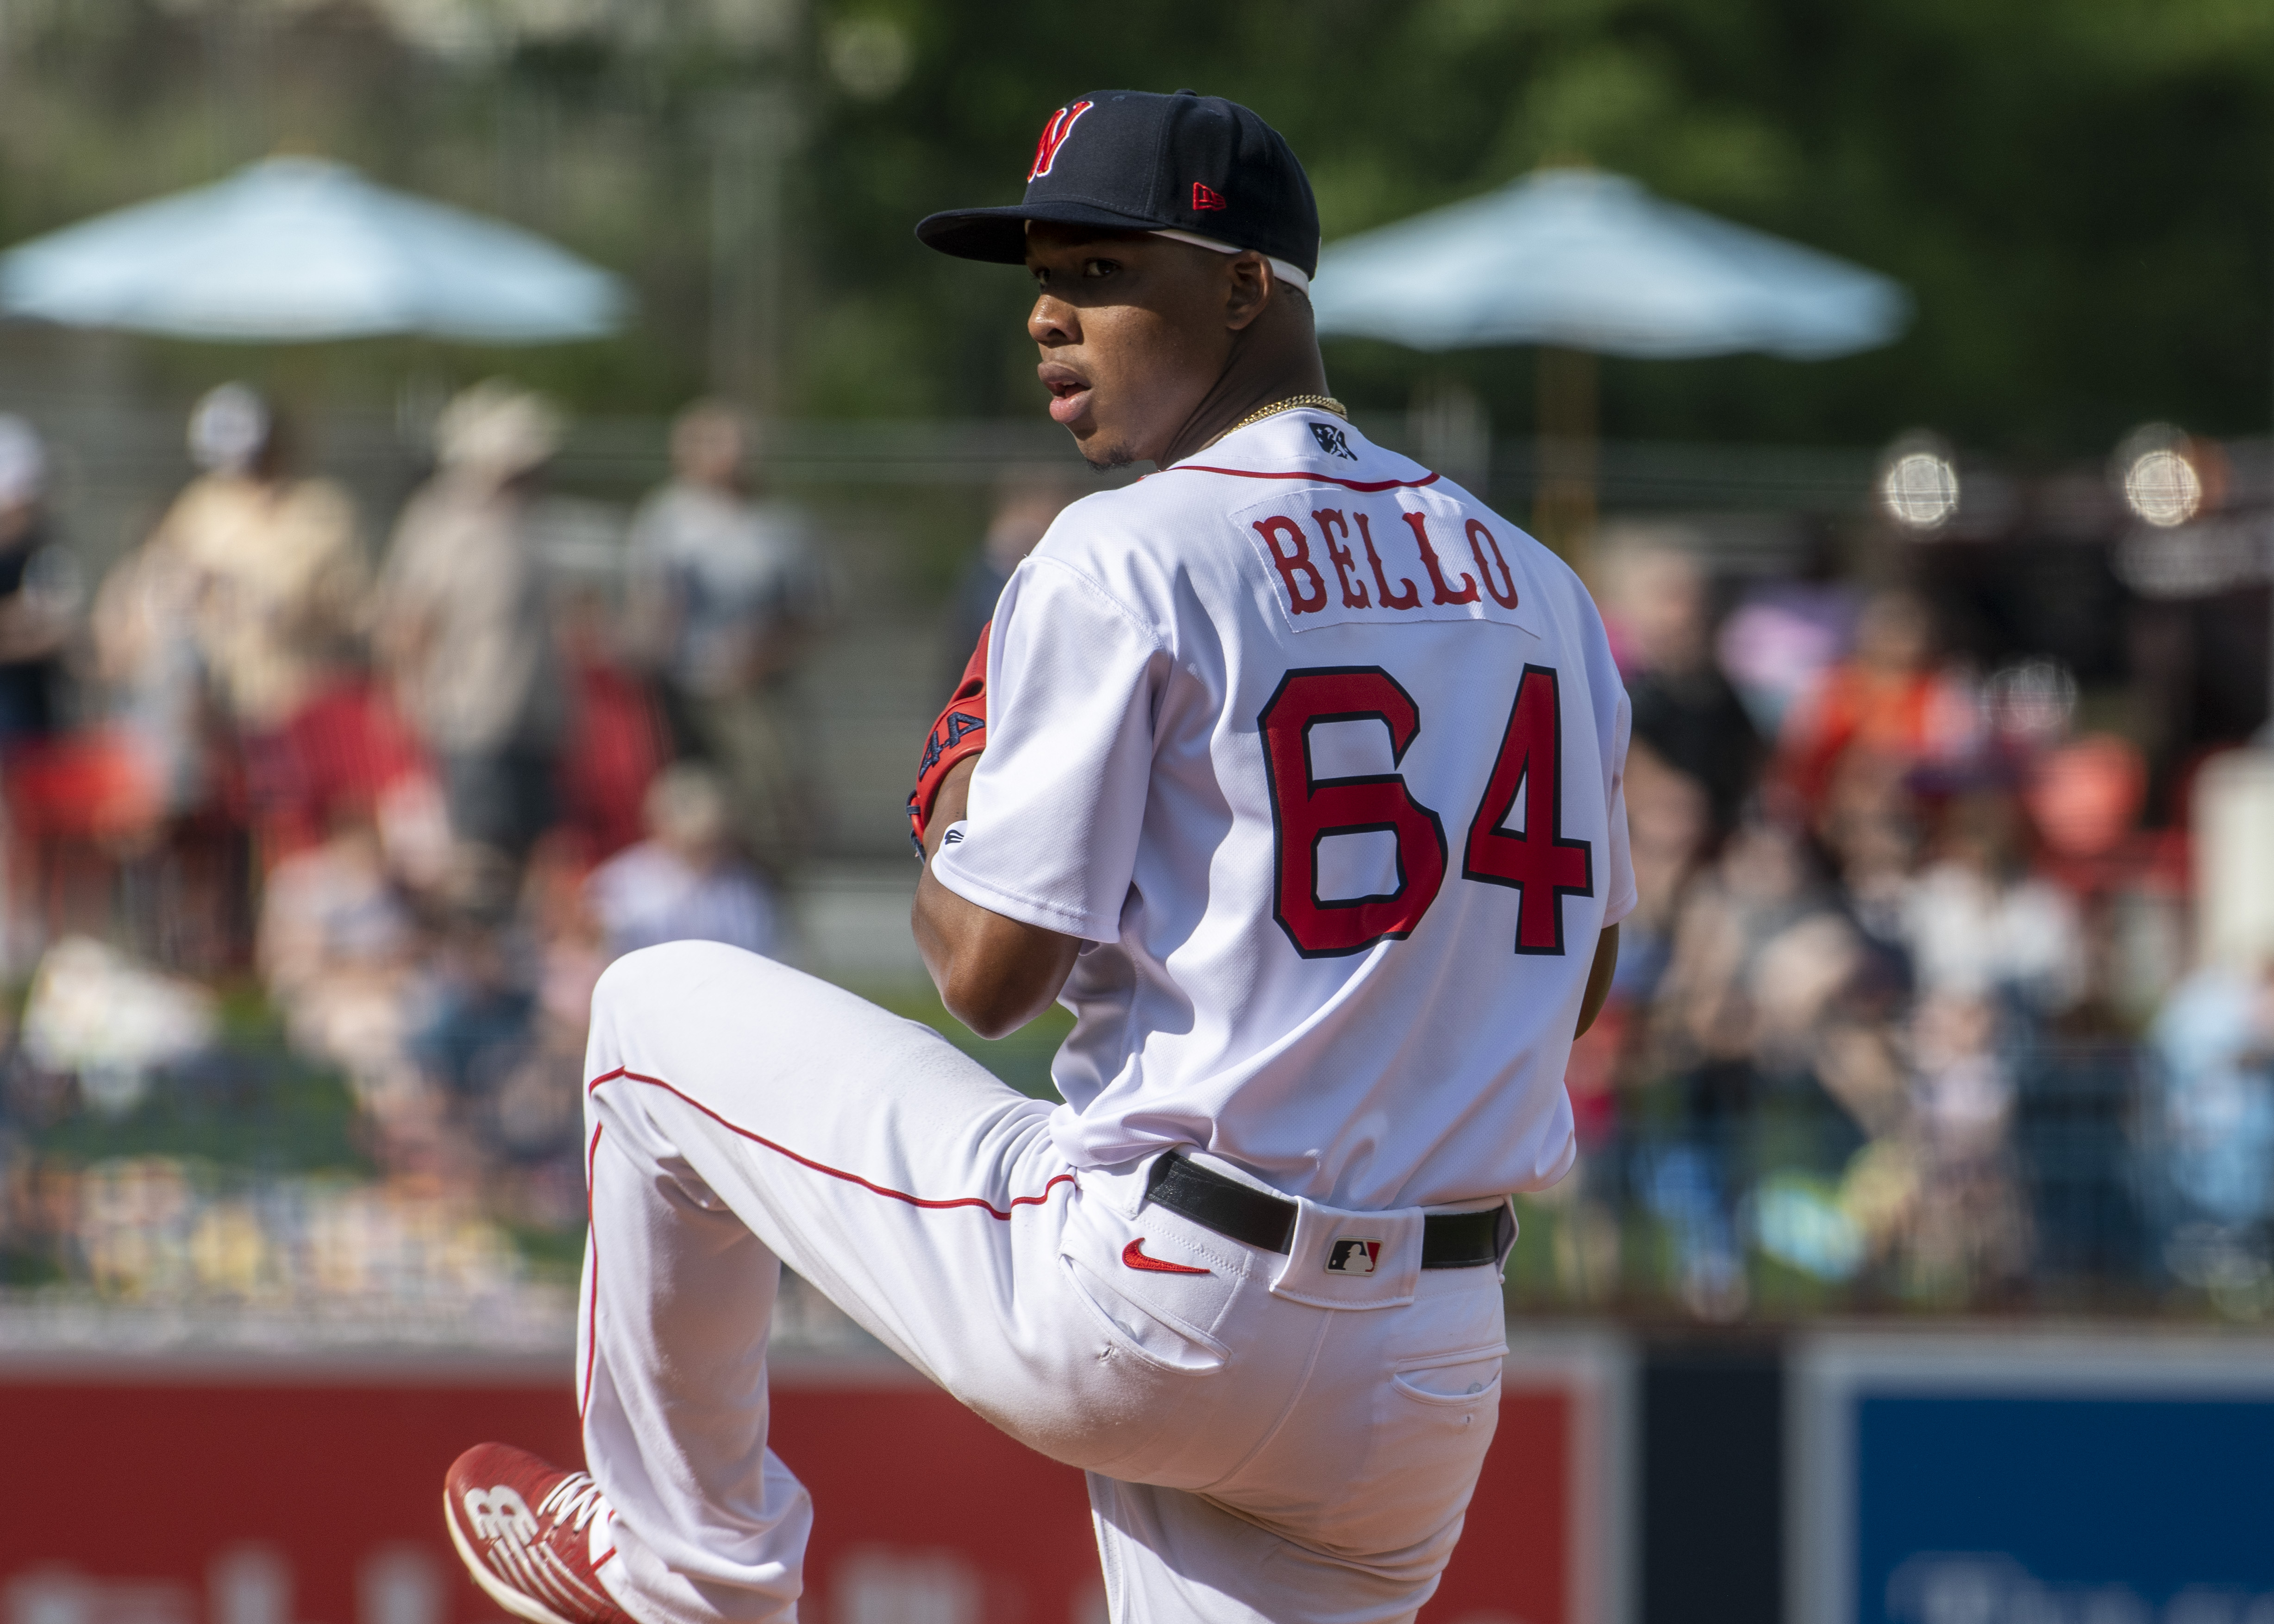 The Anatomy of An Inning: Red Sox Pitcher Brayan Bello Has A New Pitch -  Over the Monster